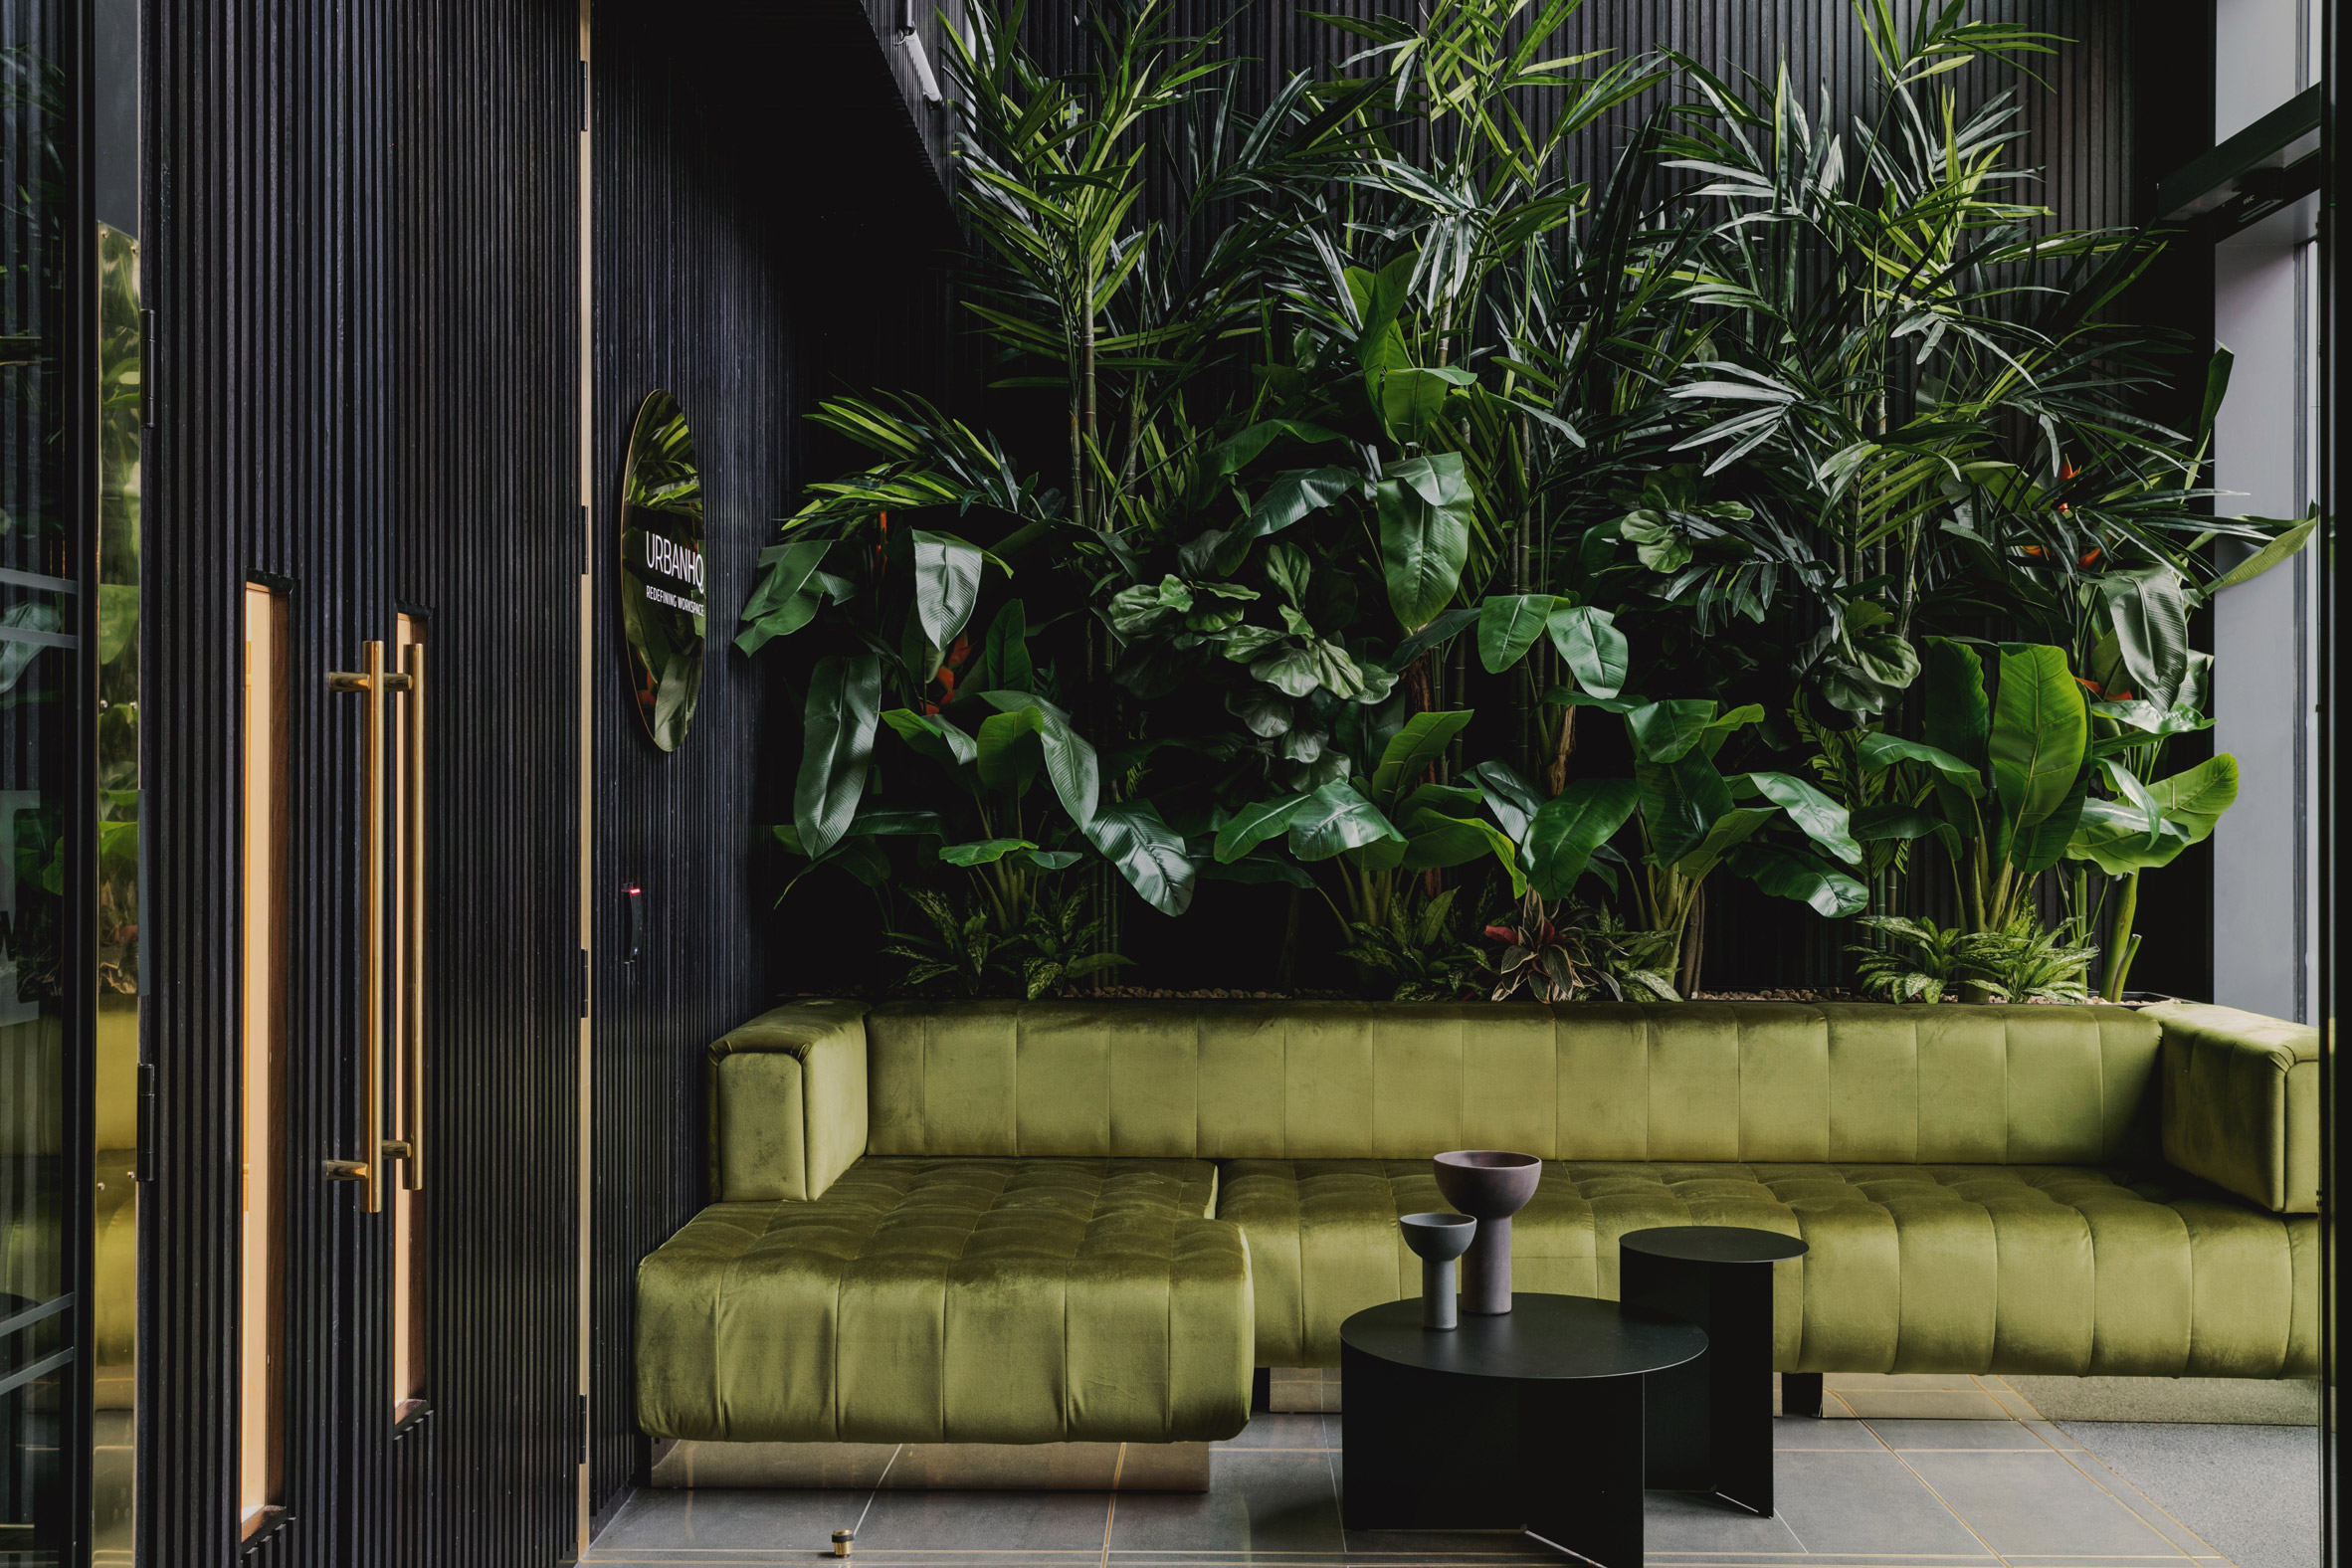 A green sofa in front of a wall of plants